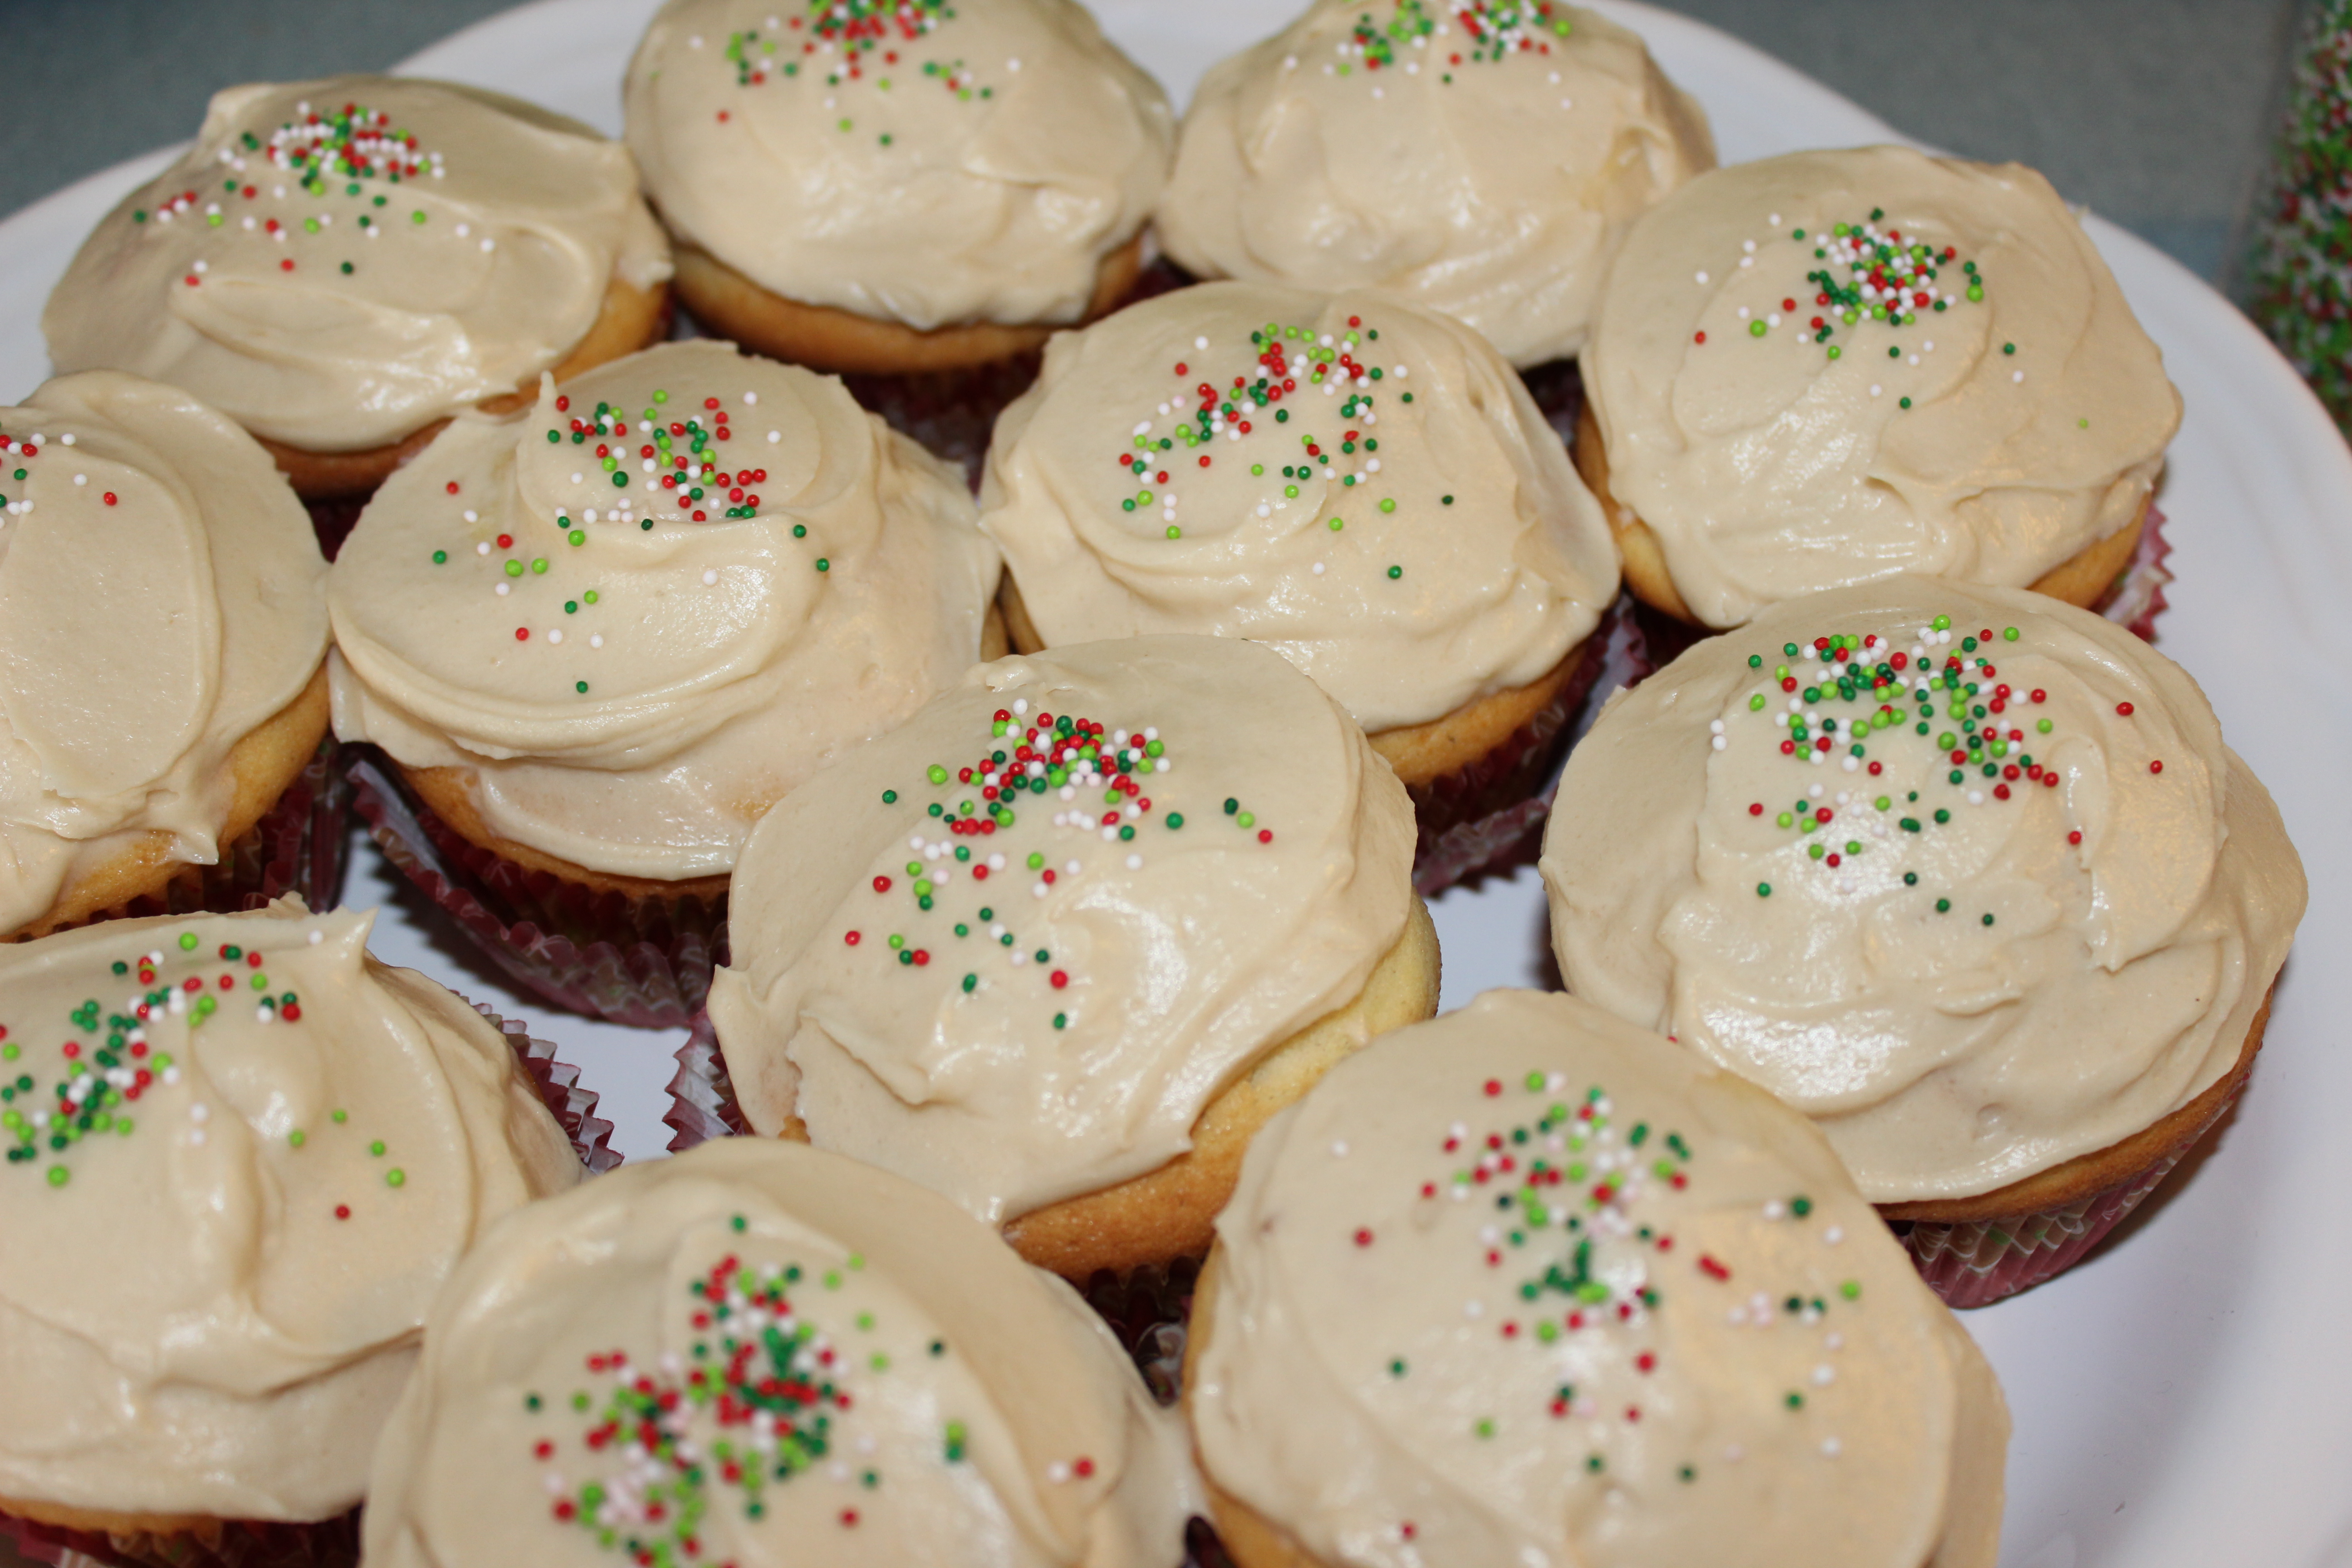 Buttermilk Cupcakes with Brown Sugar Icing